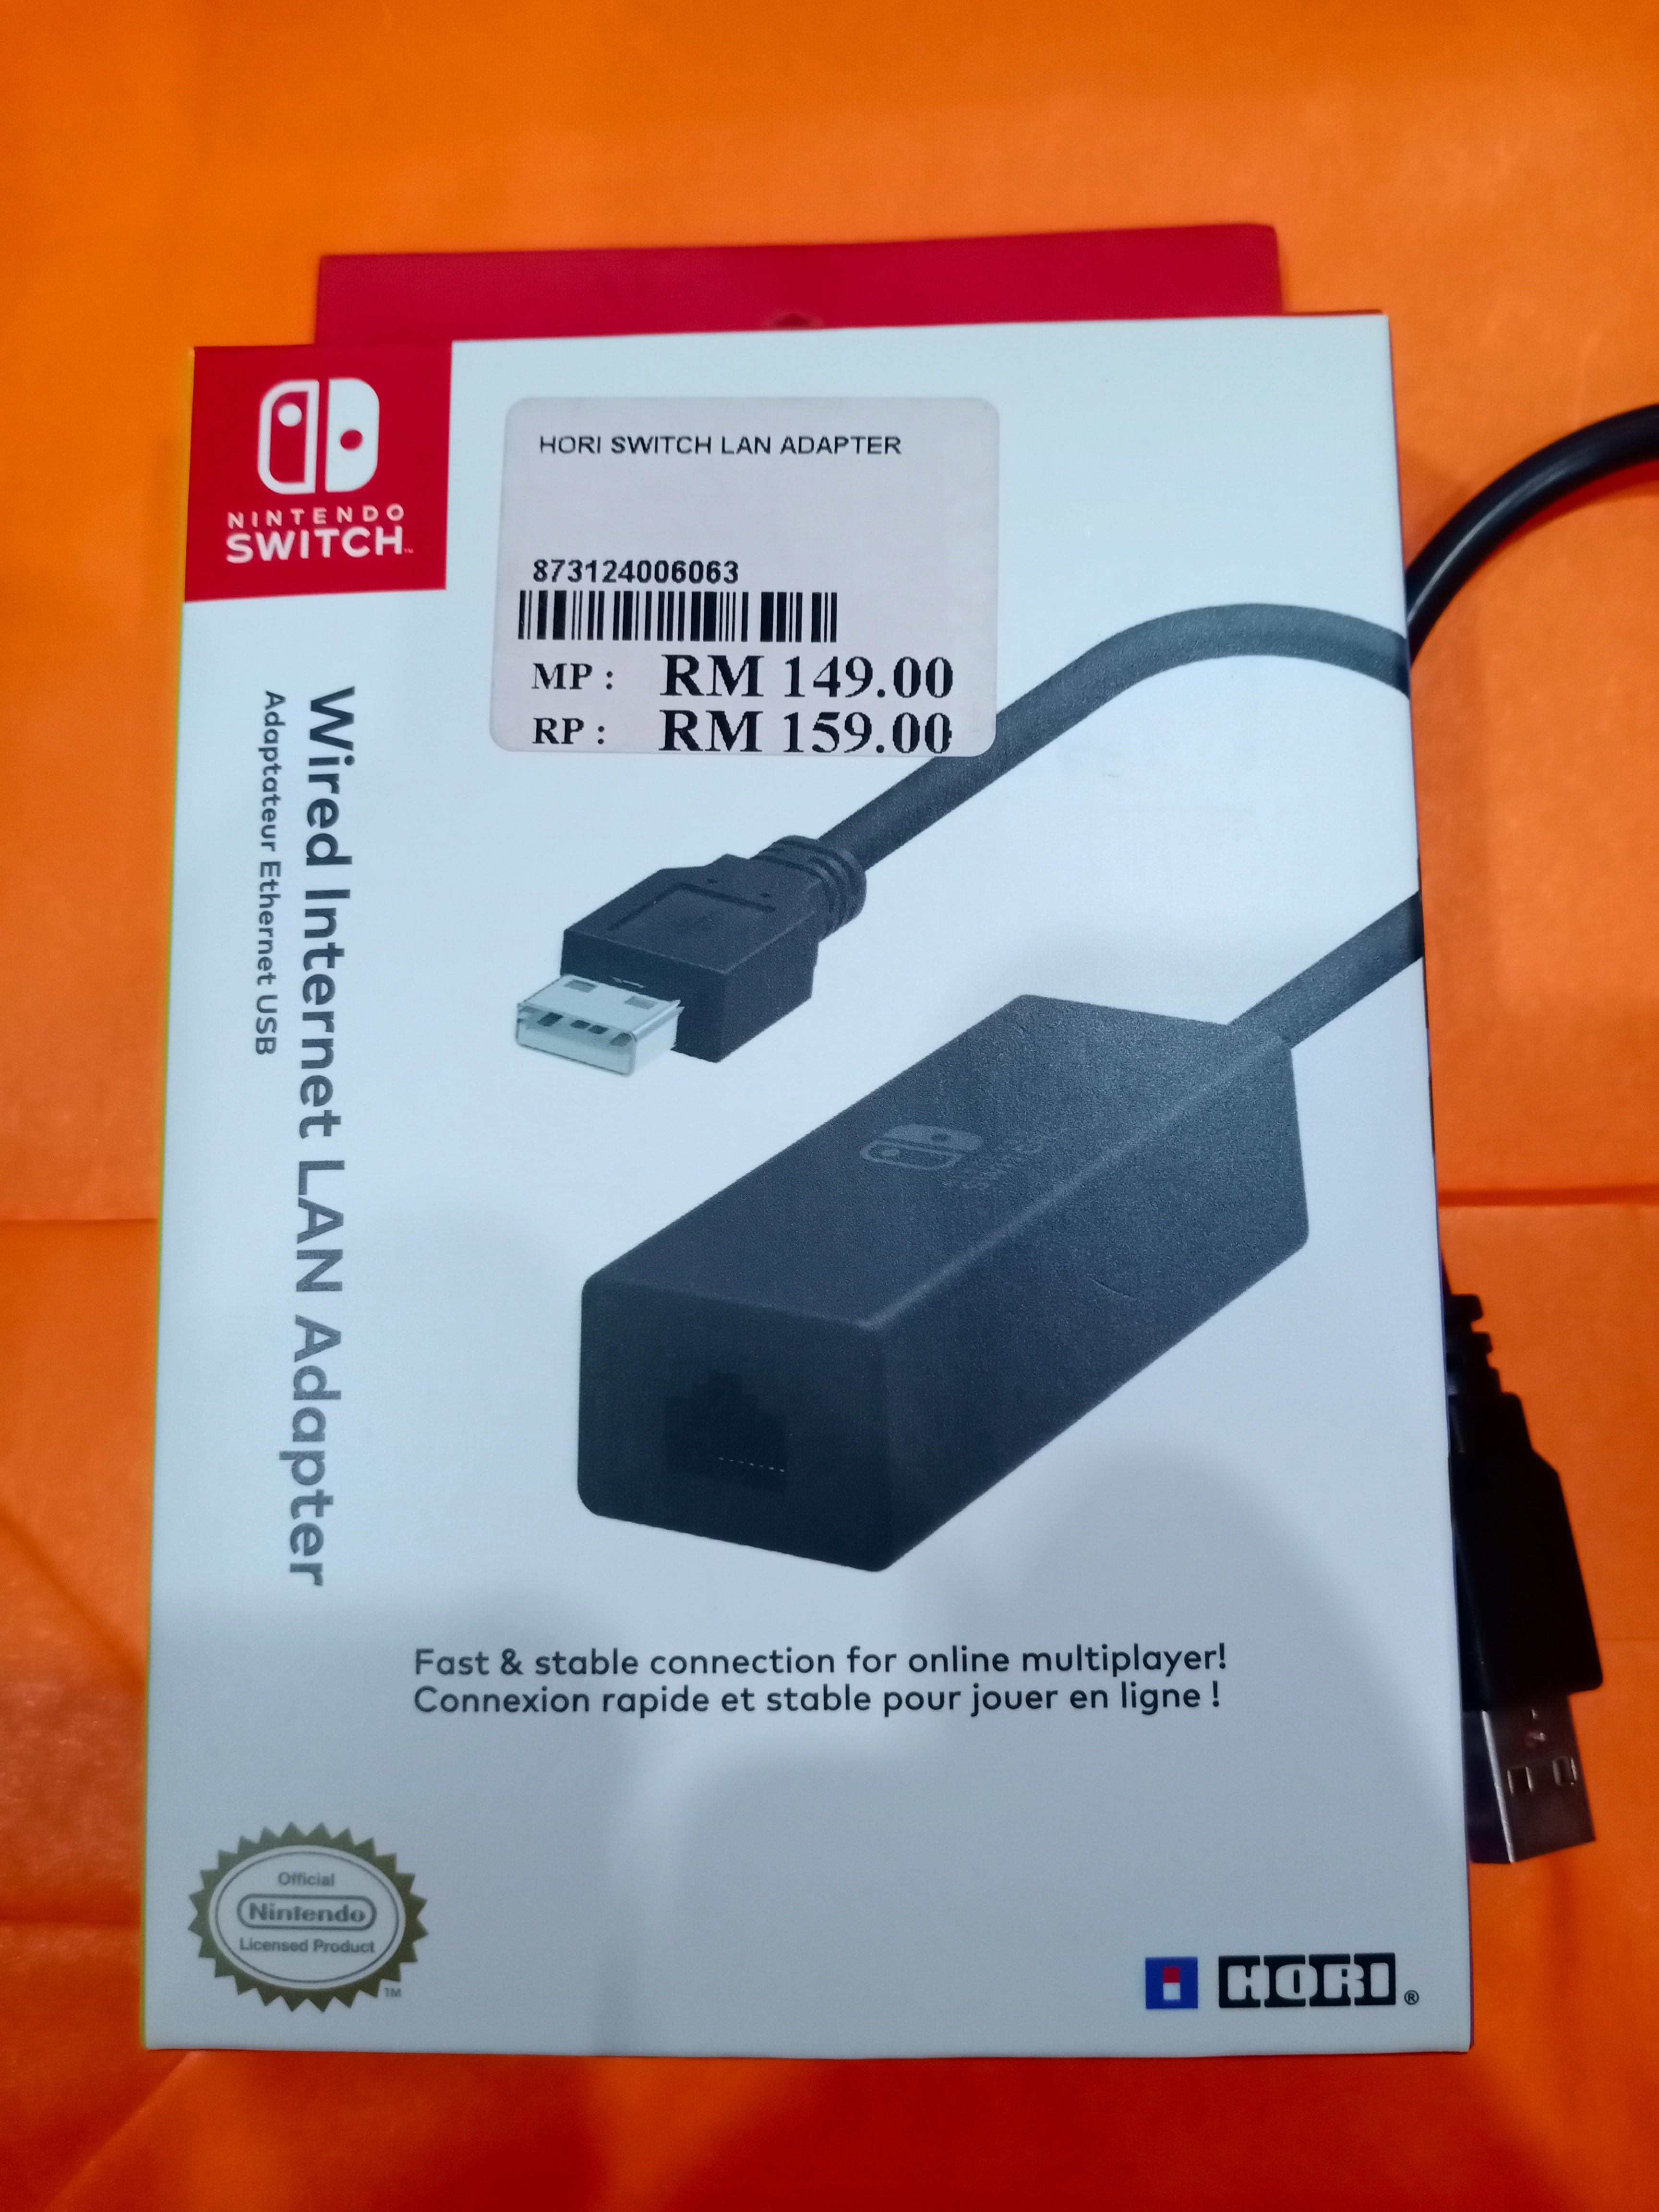 does the switch come with a lan adapter